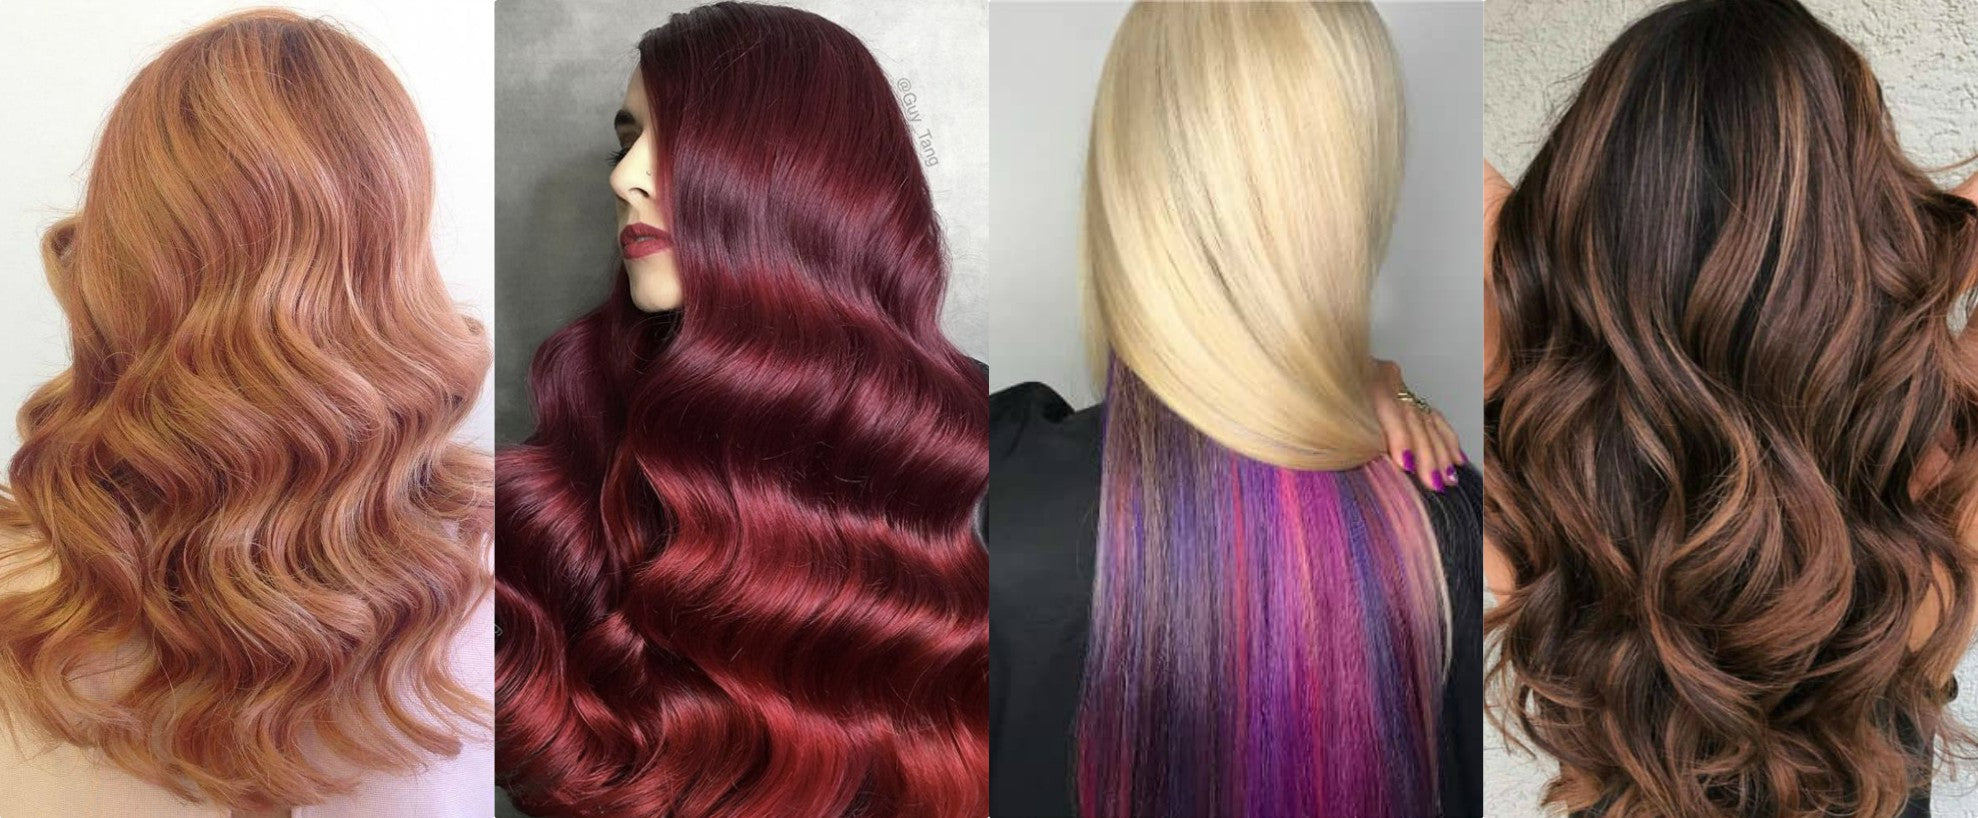 Top 7 Hair Color Trends To Try Your Next Salon Visit.